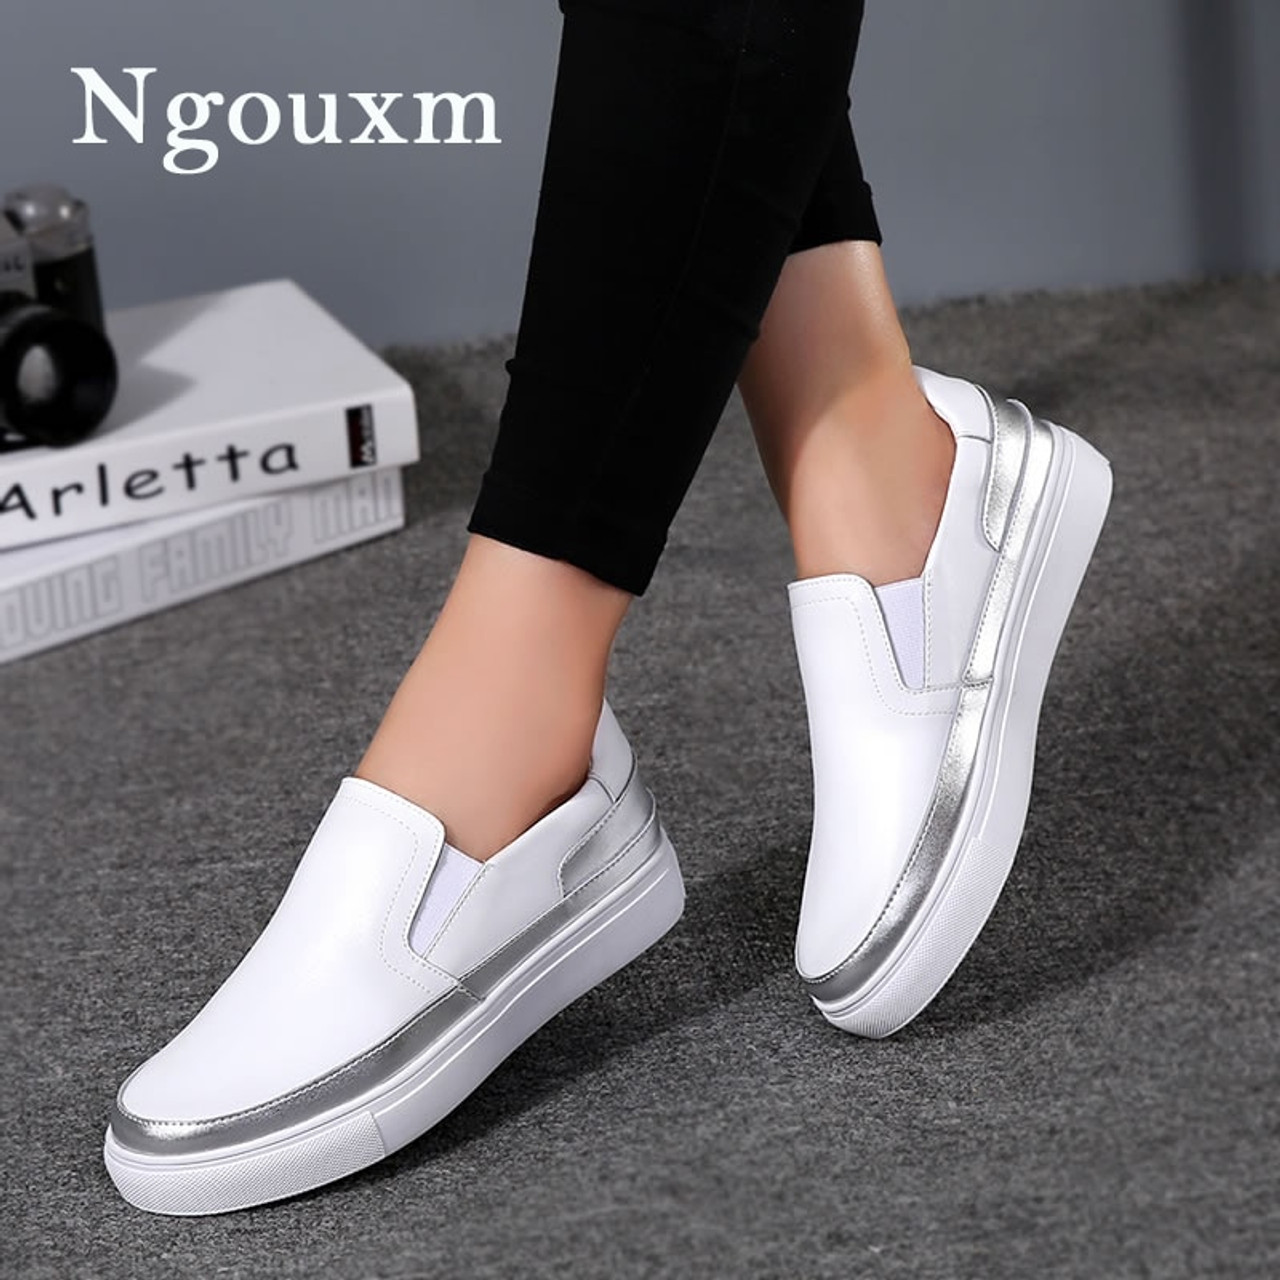 slip on leather shoes womens